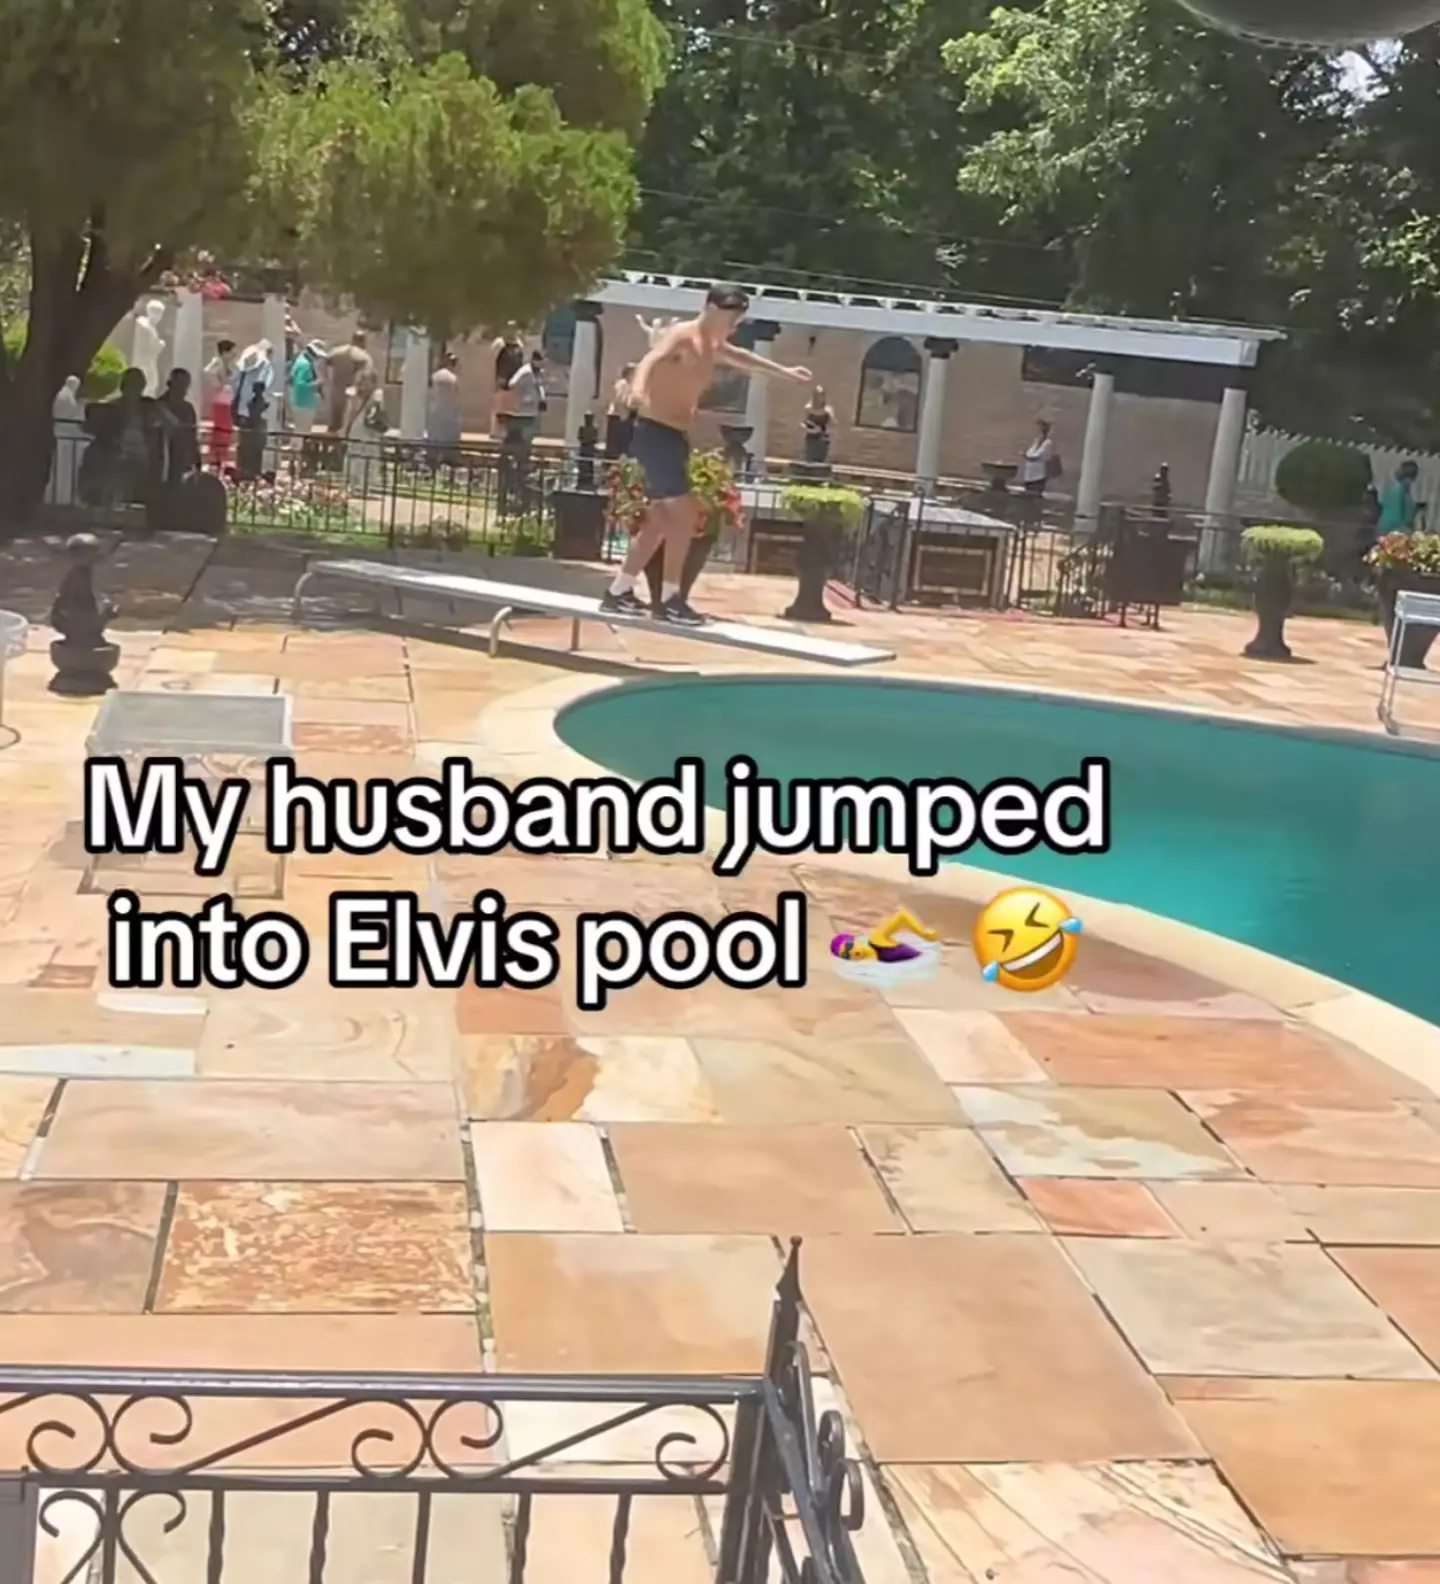 The British tourist was filmed by his wife jumping into Elvis Presley's pool.